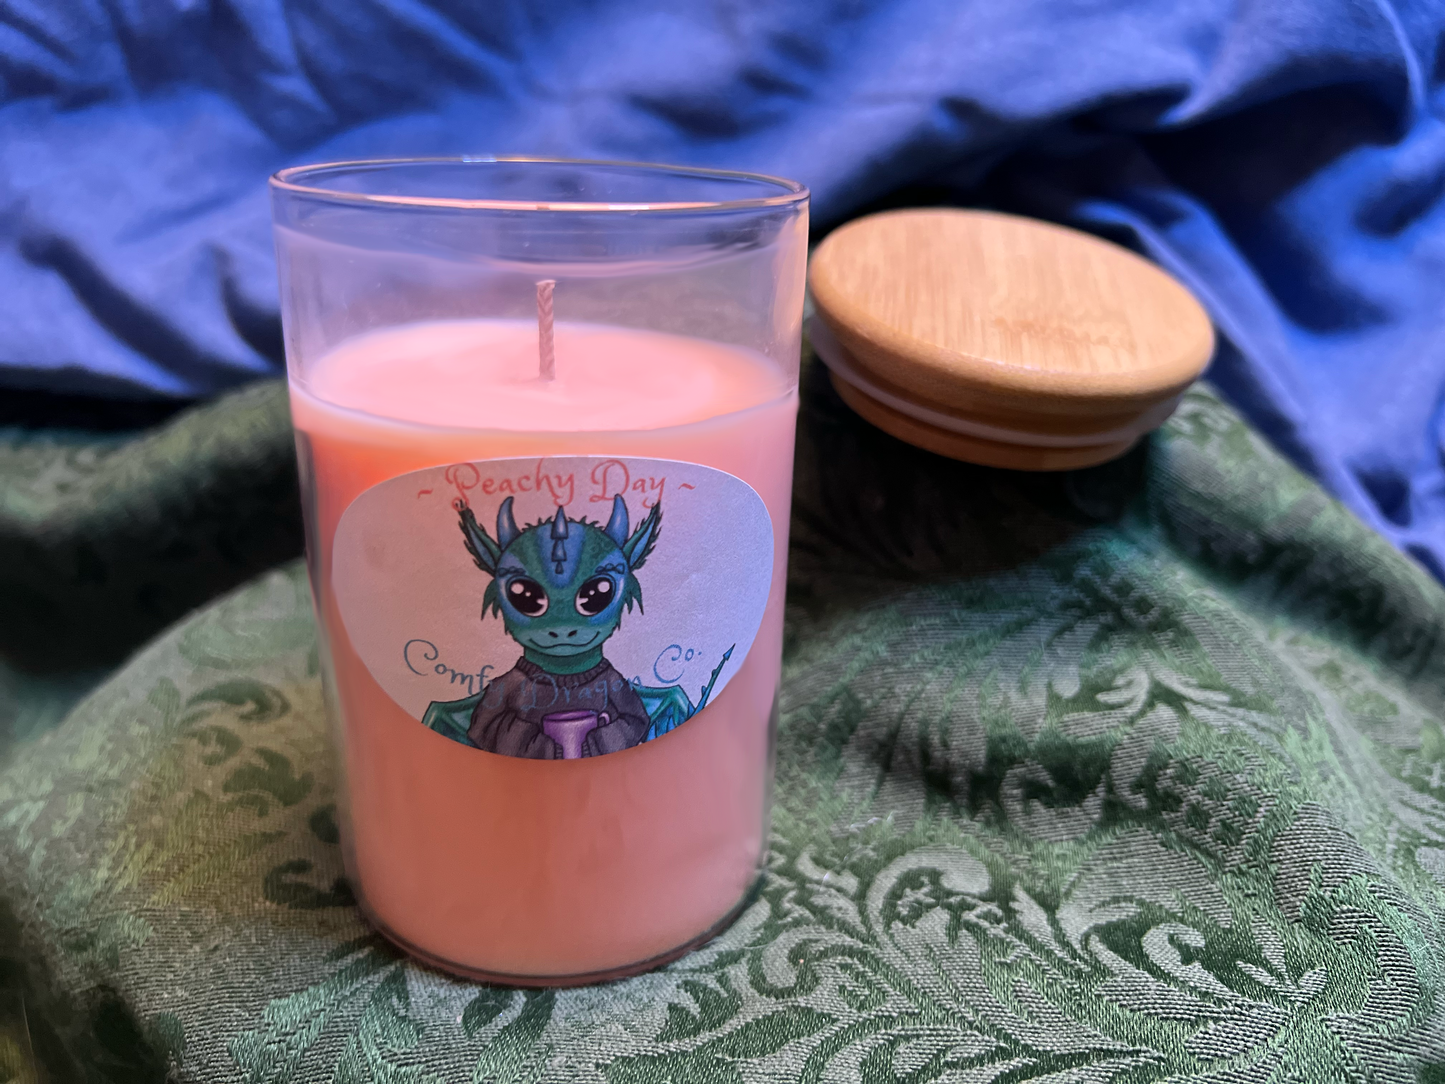 8oz Peachy Day Candle